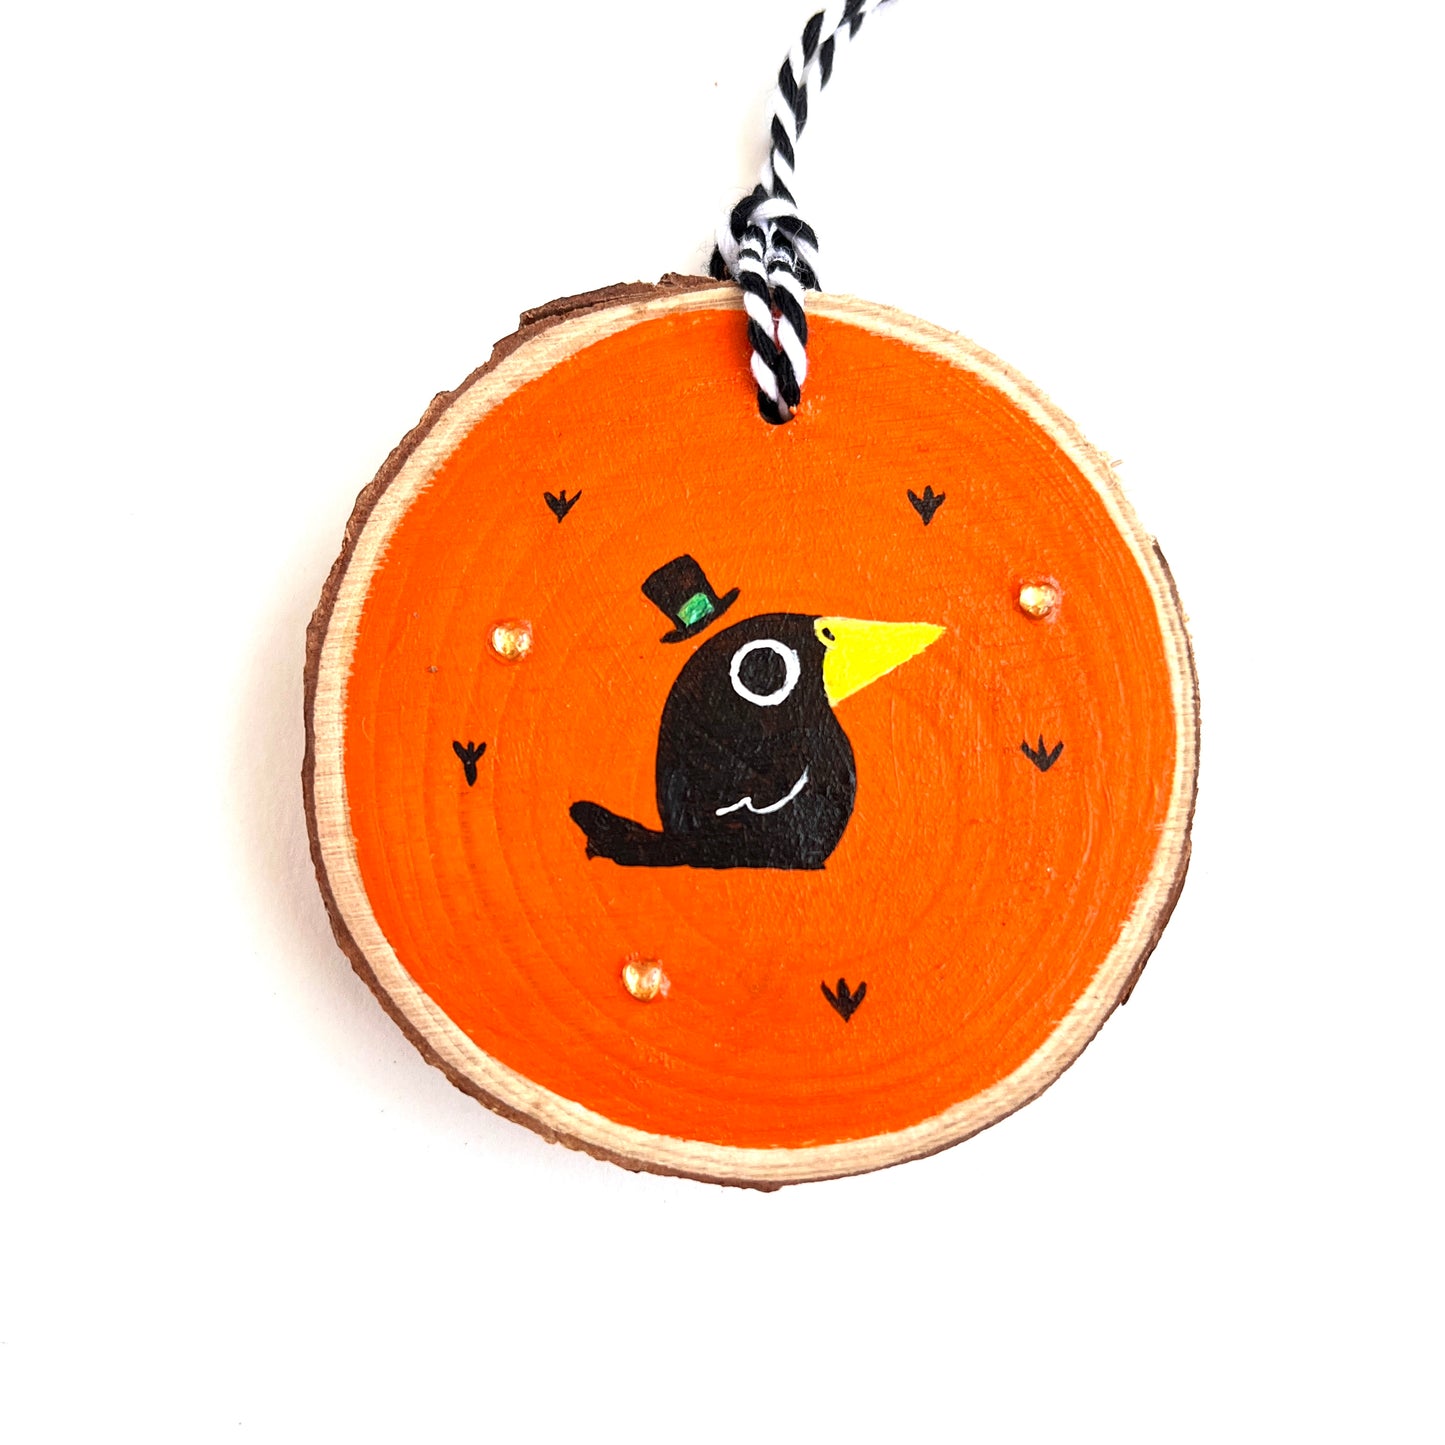 wooden ornament with a cute black baby crow on an orange background with orange heart rhinestones